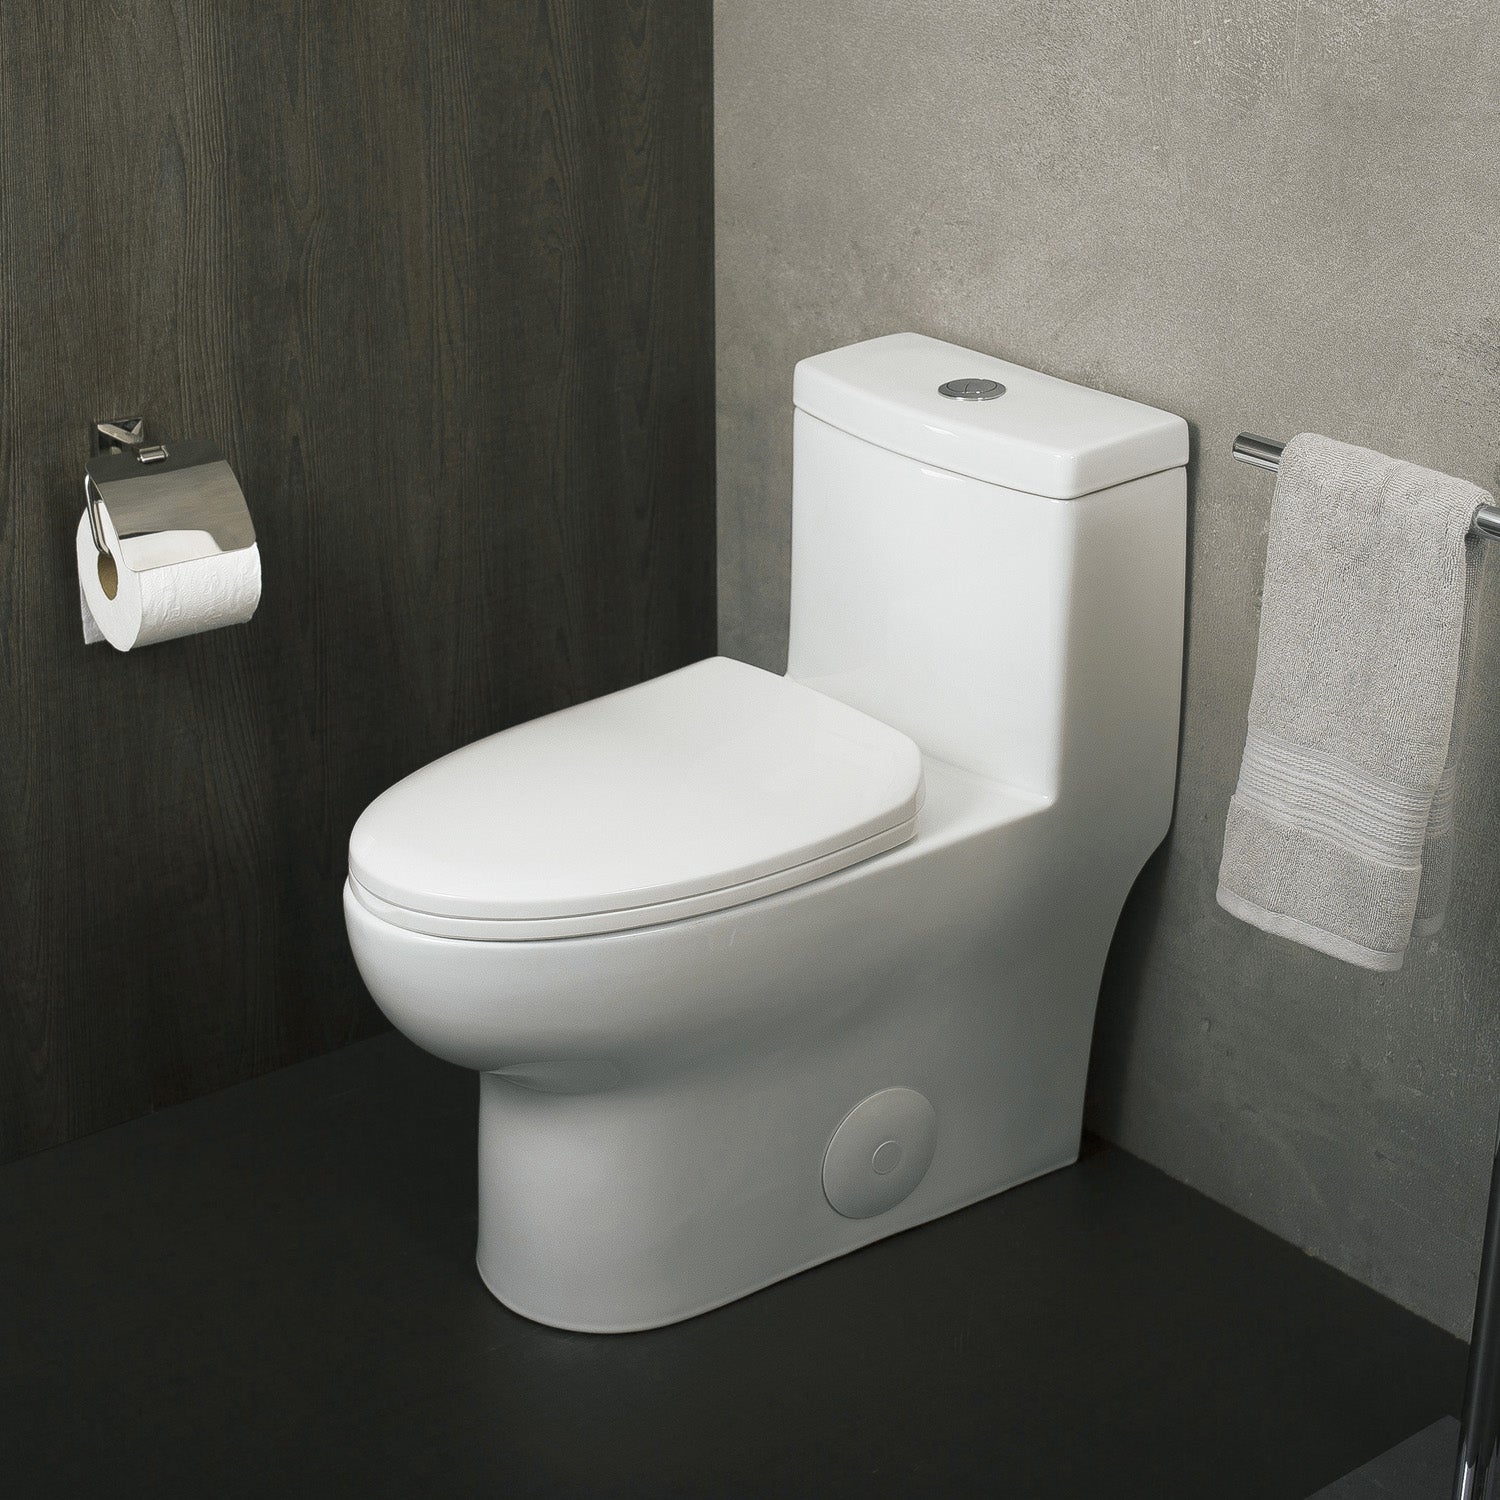 DAX One Piece Oval Toilet with Soft Closing Seat and Dual Flush High-Efficiency, Porcelain, White Finish, Height 28-3/4 Inches (BSN-76)